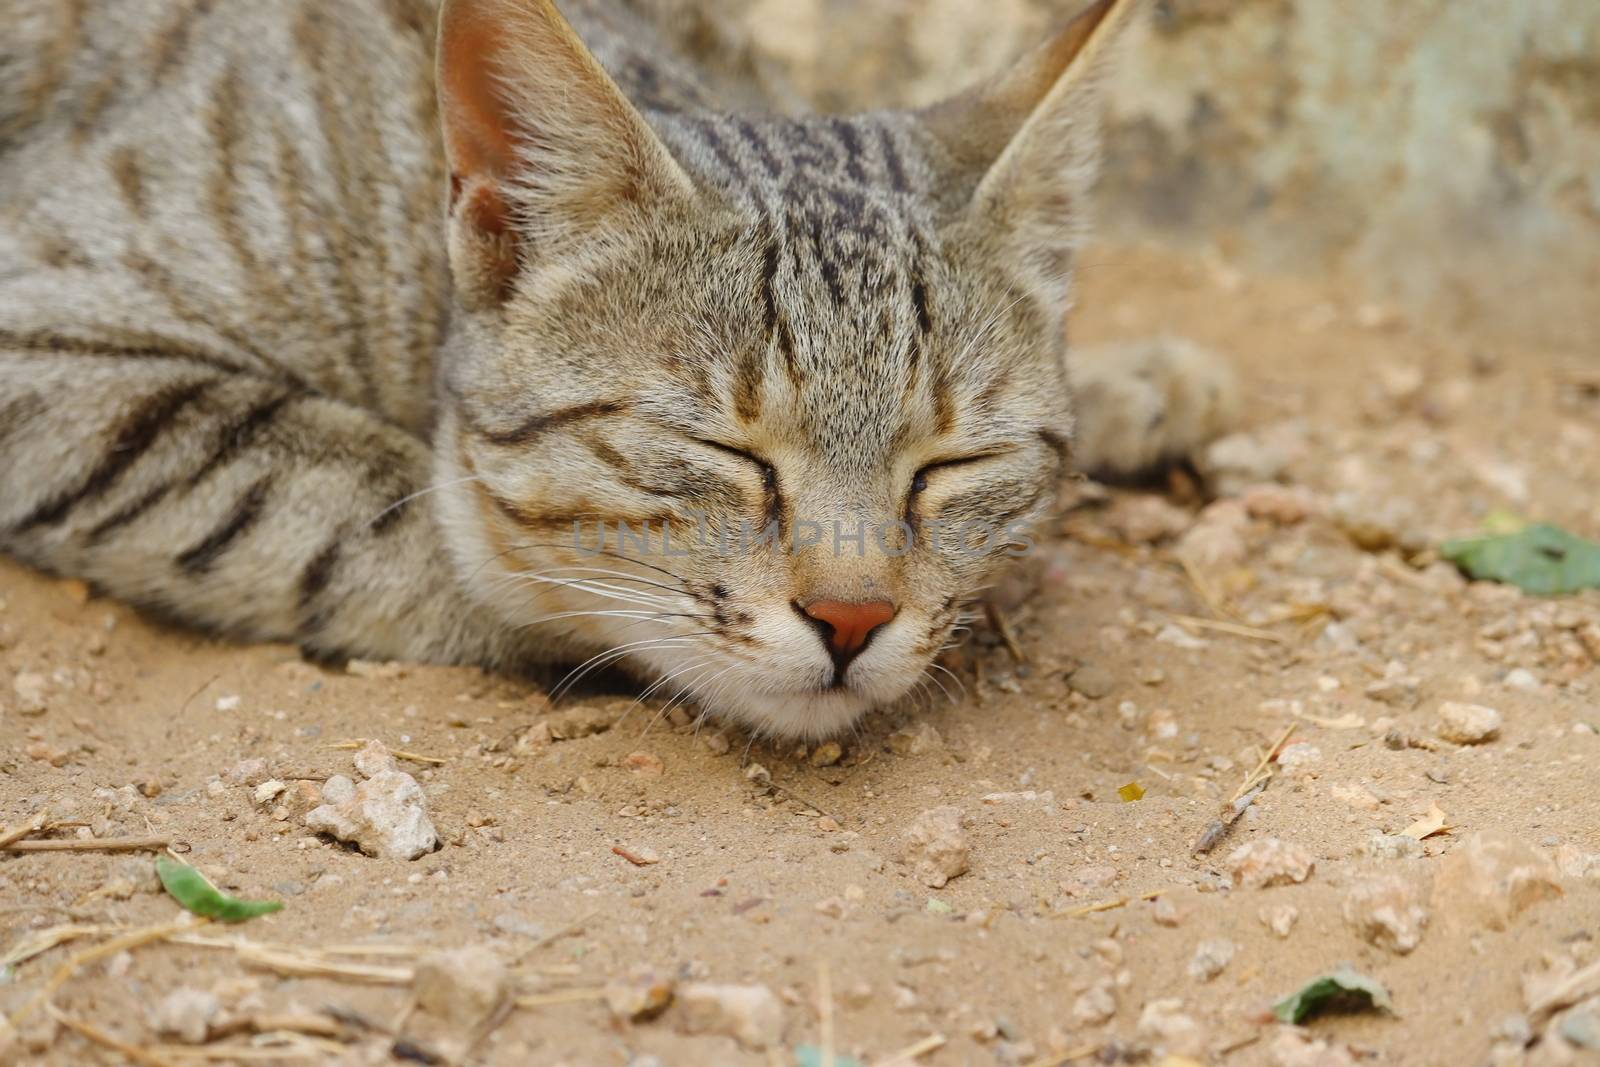 A cat domestic sleeping on the ground with eyes closed, animals sleeping on the ground